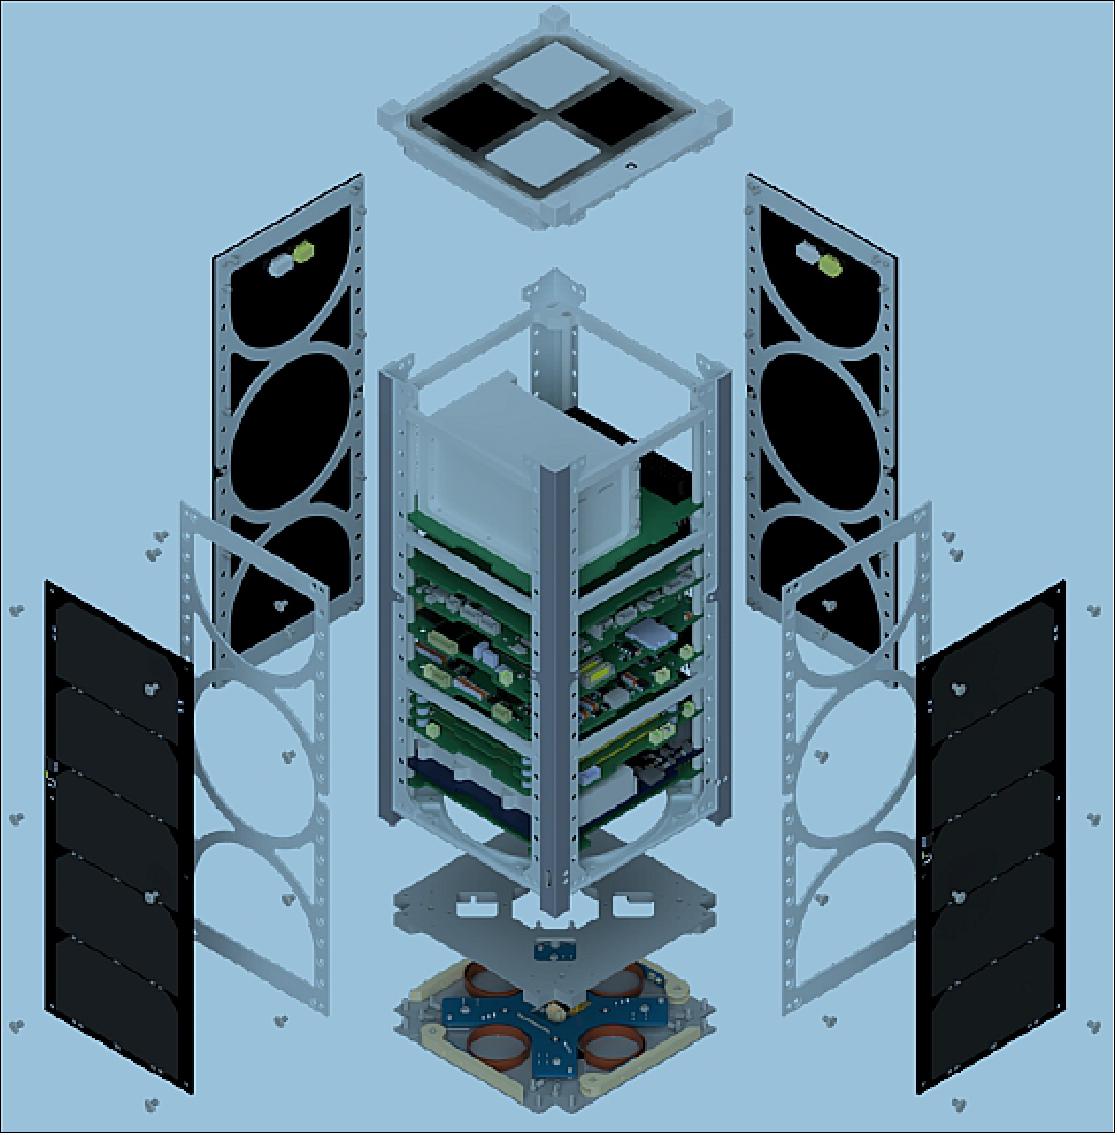 Figure 1: Exploded View of the EIRSAT-1 spacecraft hardware (image credit: UCD)